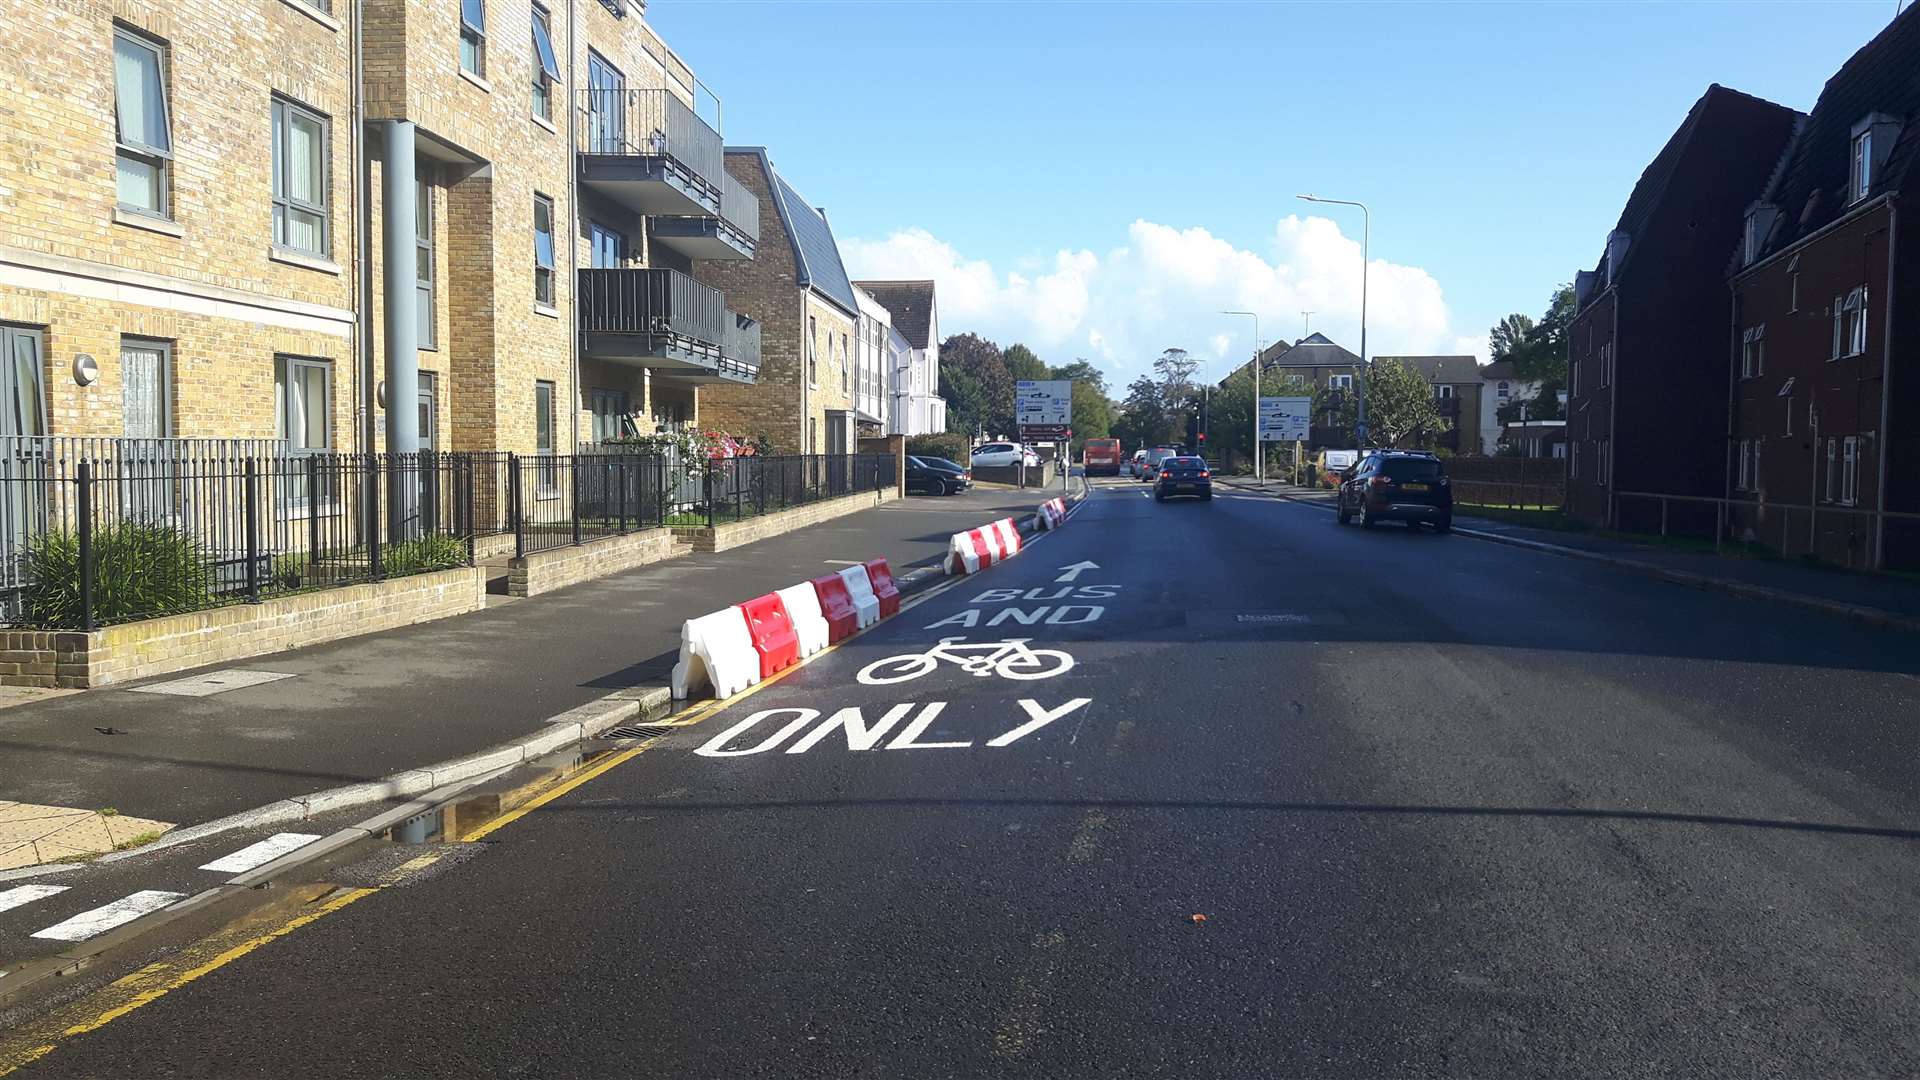 The bus and cycle lane along Maison Dieu Road has been scrapped